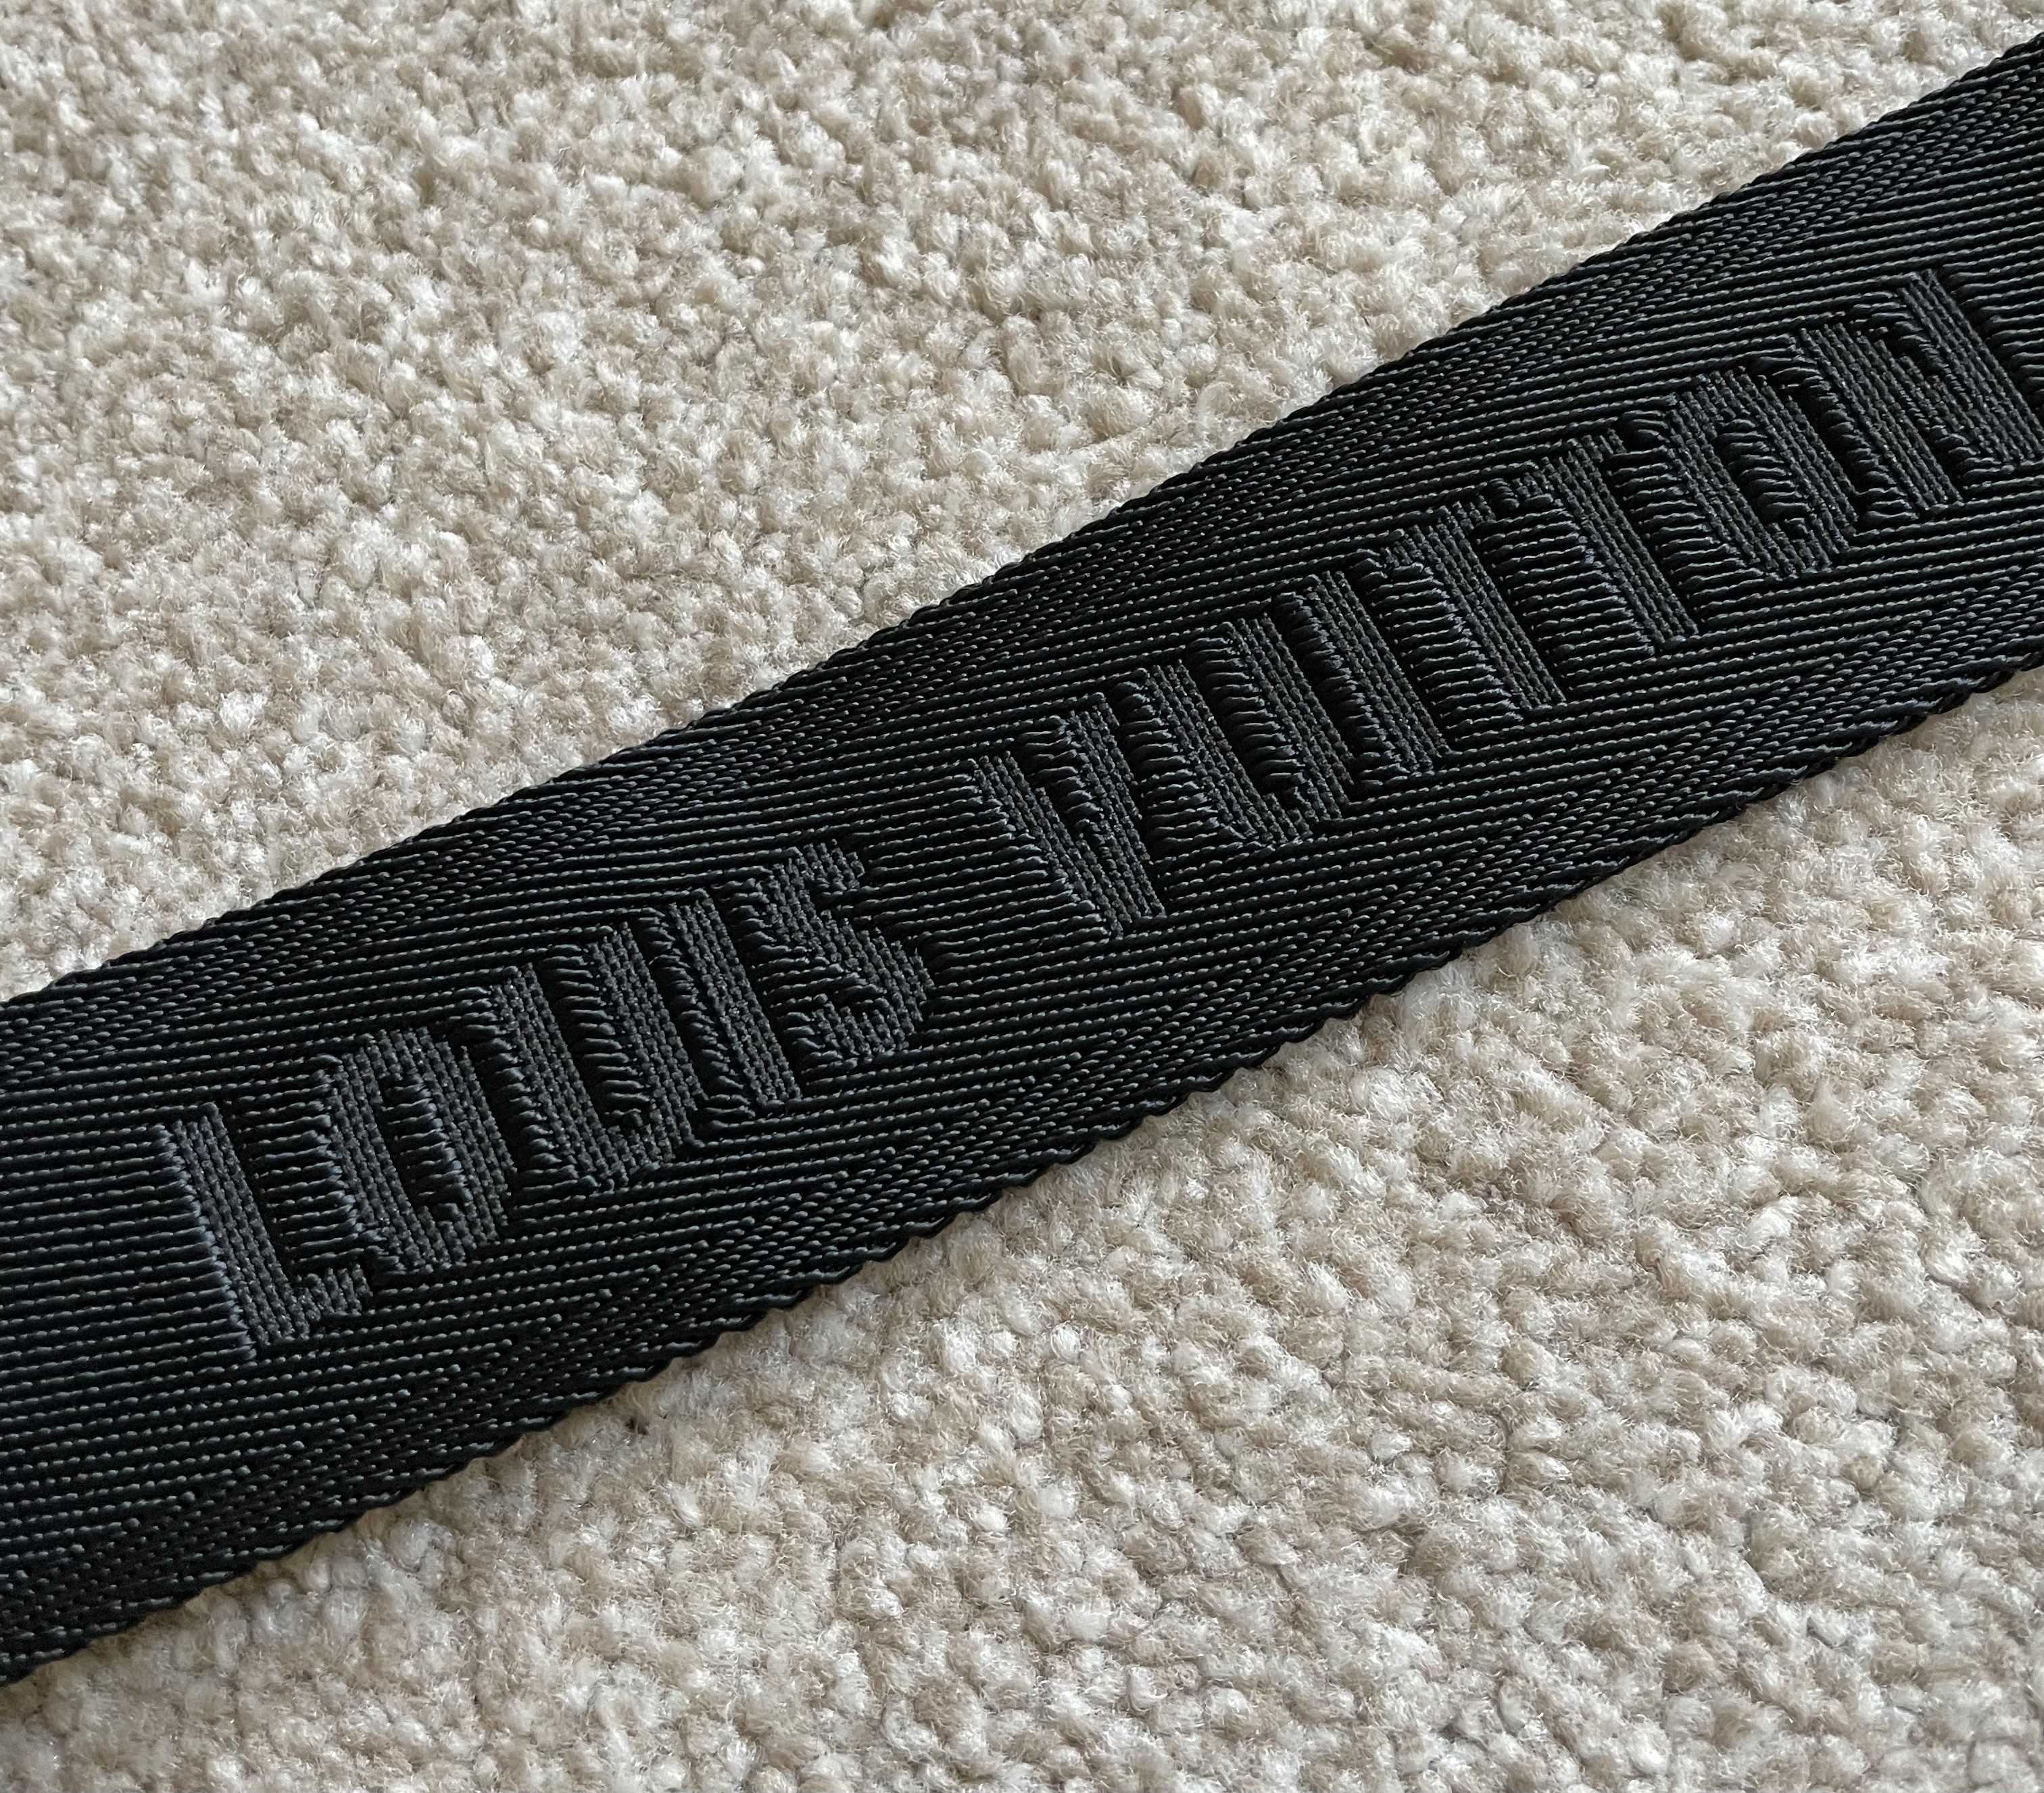 Real Leather Louis Vuitton Duo Bag Grey Color From Suplook (Best Qaulity  Replica) 1:1 : r/Suplook